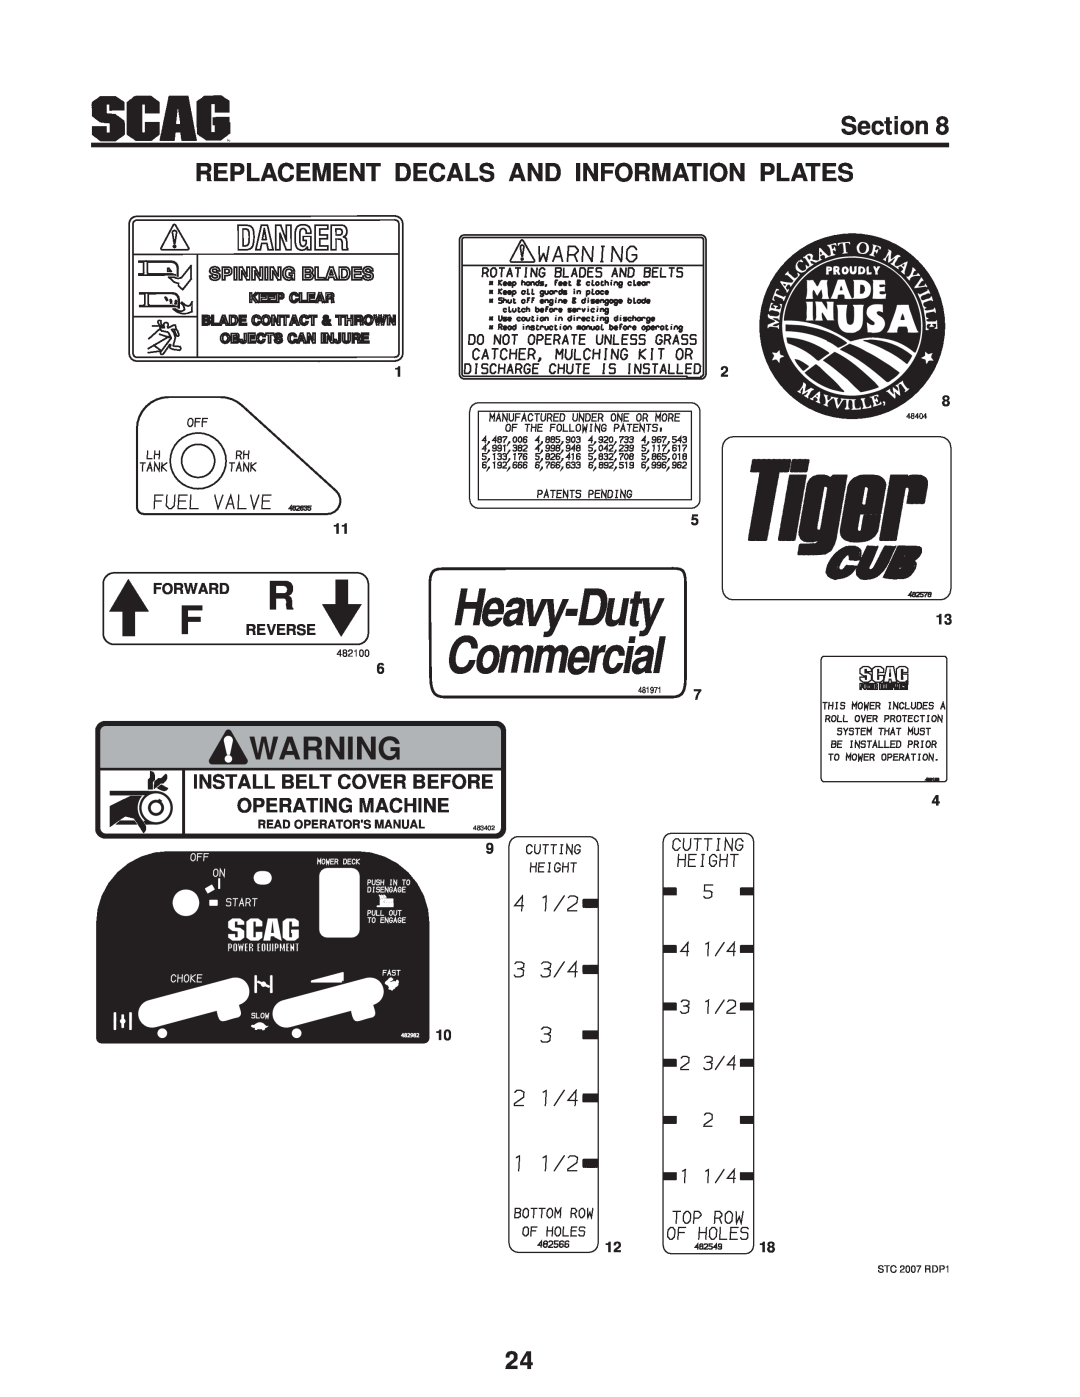 Scag Power Equipment STC48V-23CV Section REPLACEMENT DECALS AND INFORMATION PLATES, Commercial, Heavy-Duty, Forward, 1218 